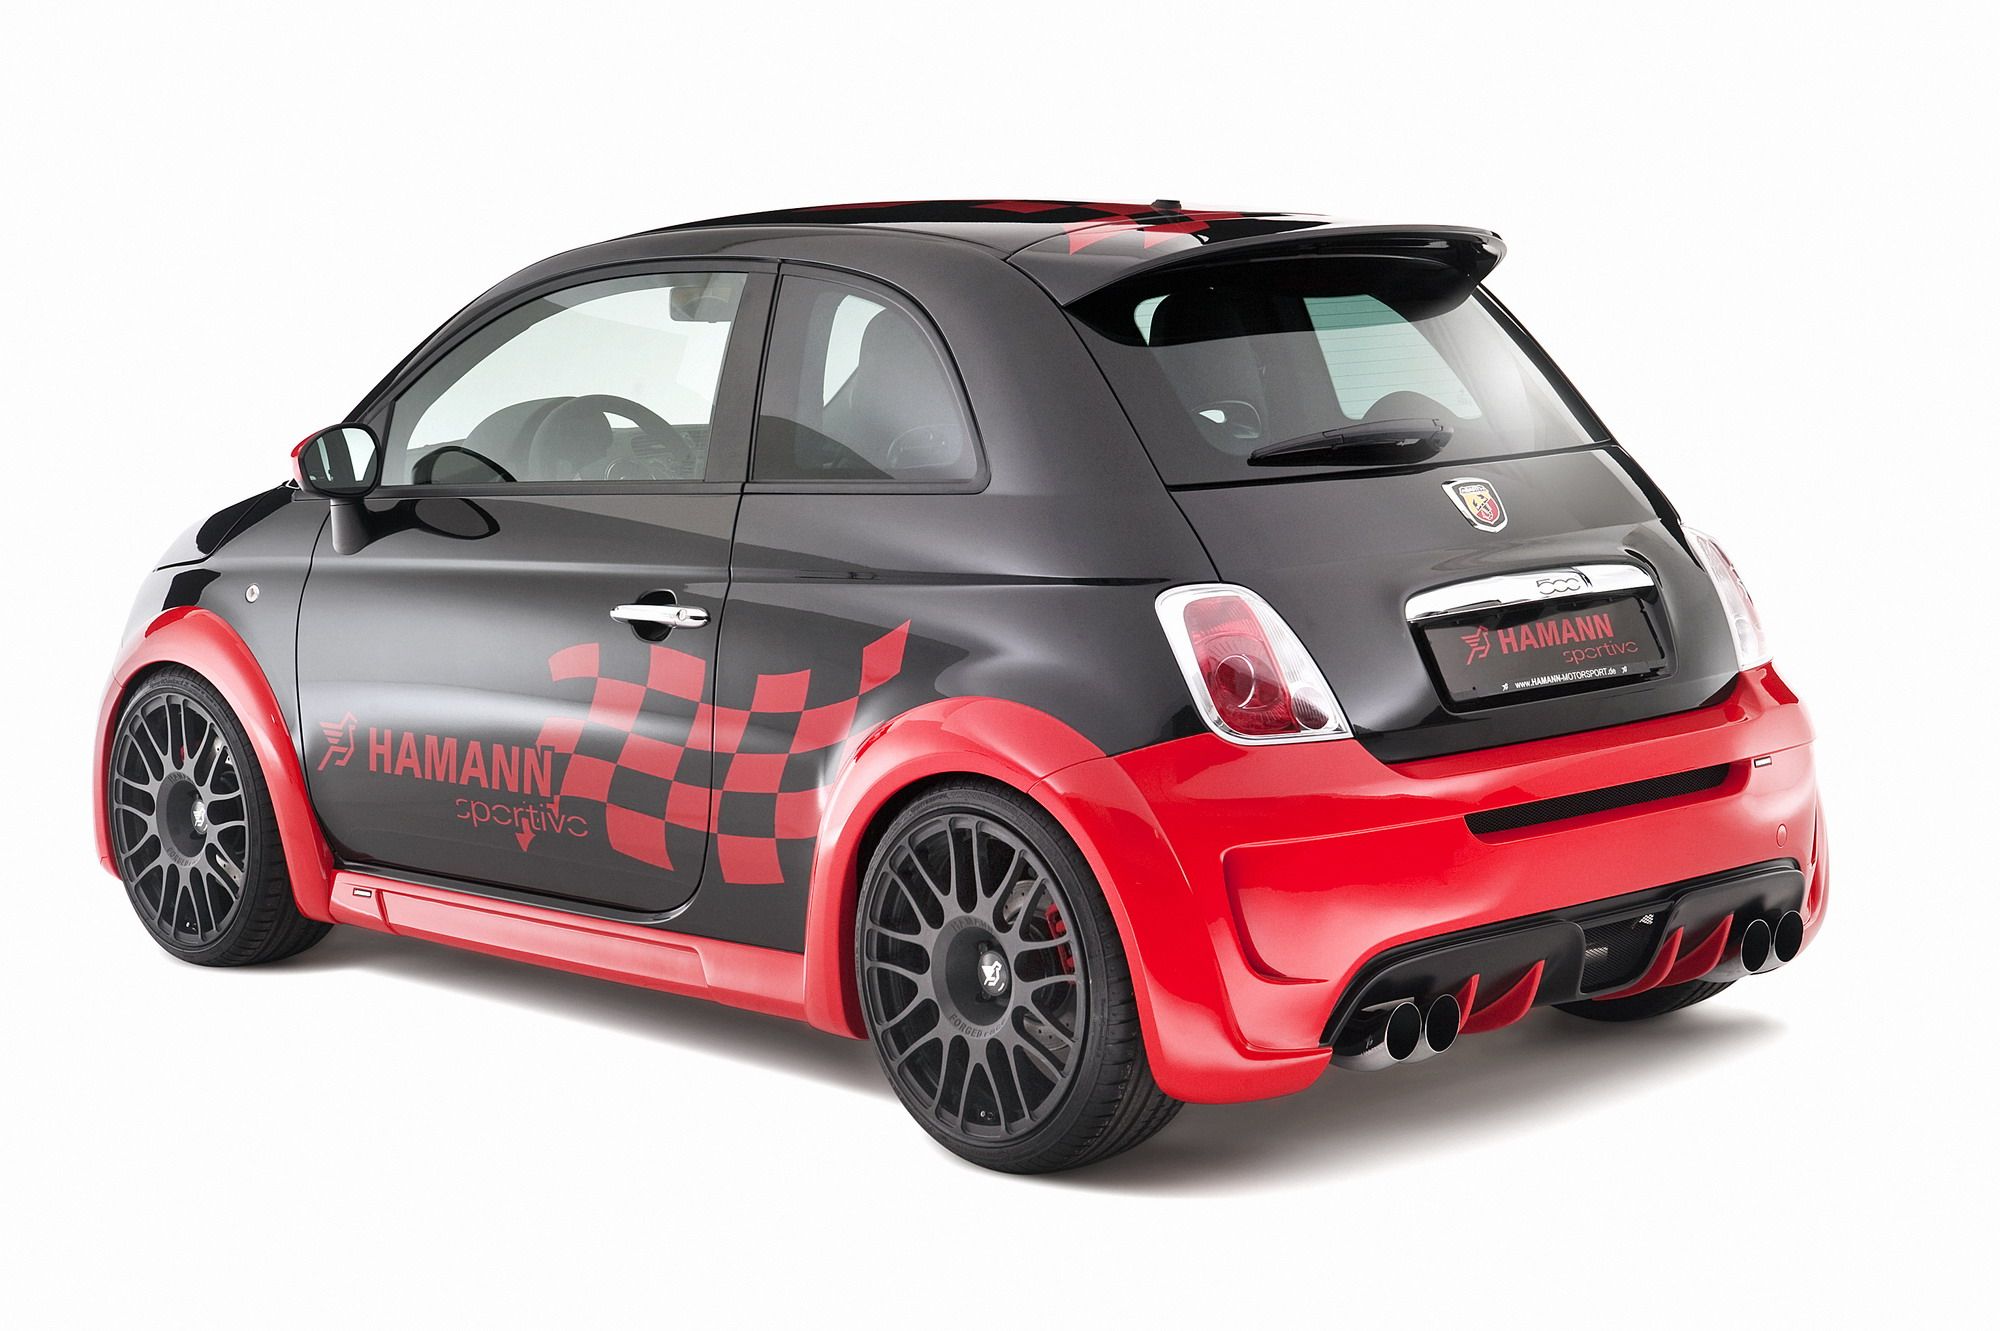 2010 Fiat 500 Abarth and Abarth esseesse by Hamann